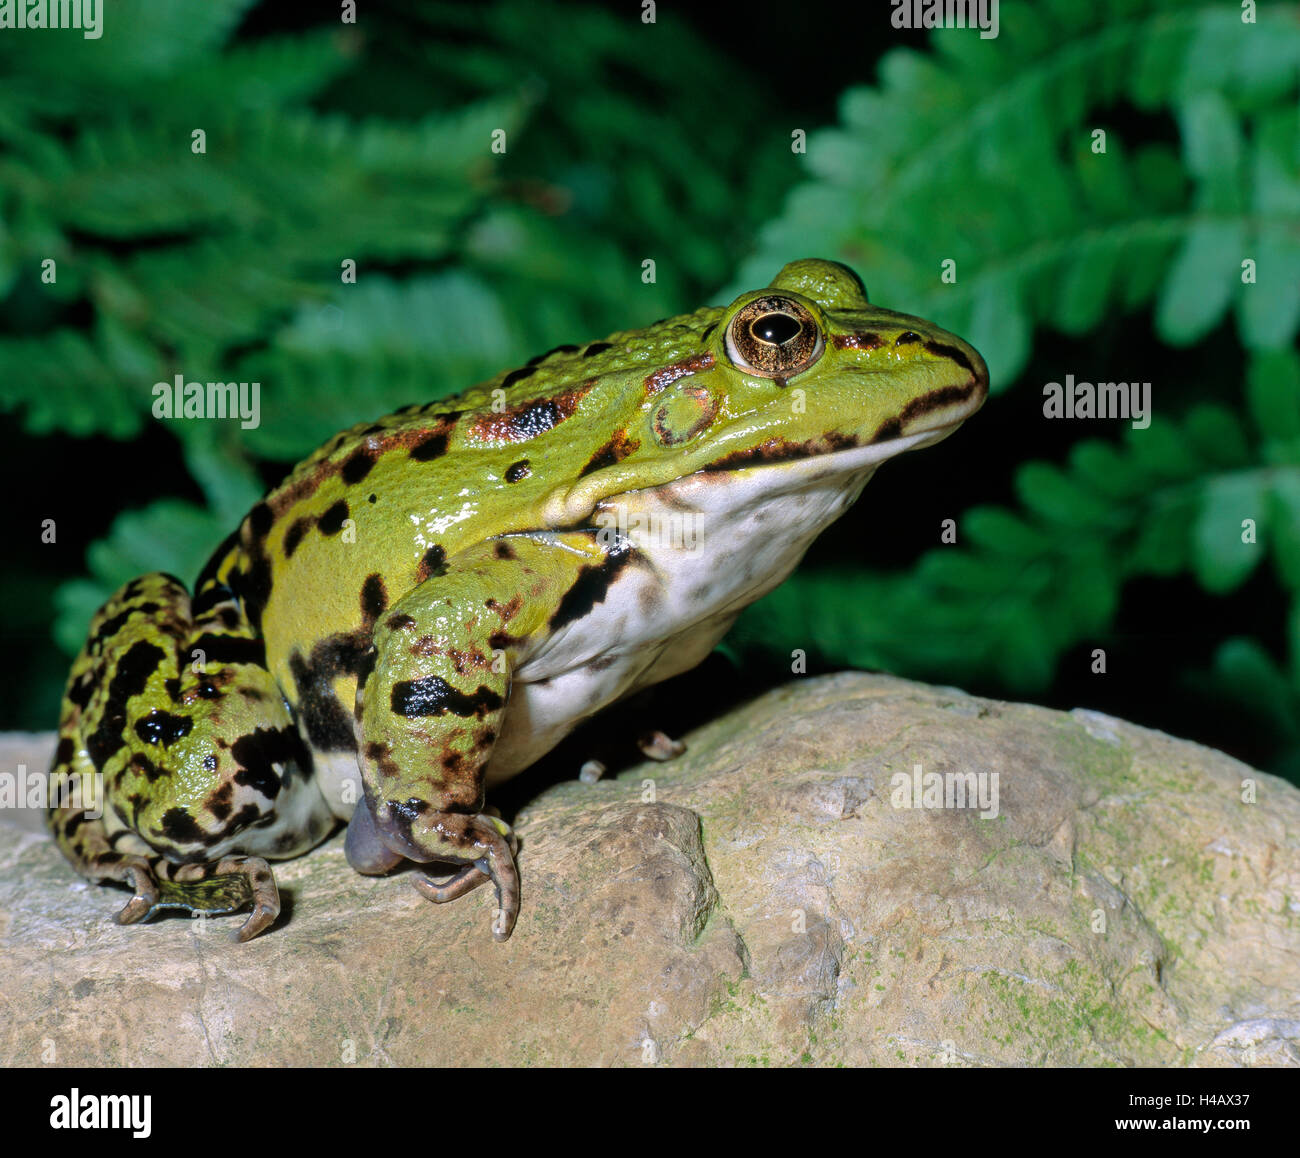 Edible frog, also green frog, on a kerbstone at the garden pond Stock Photo